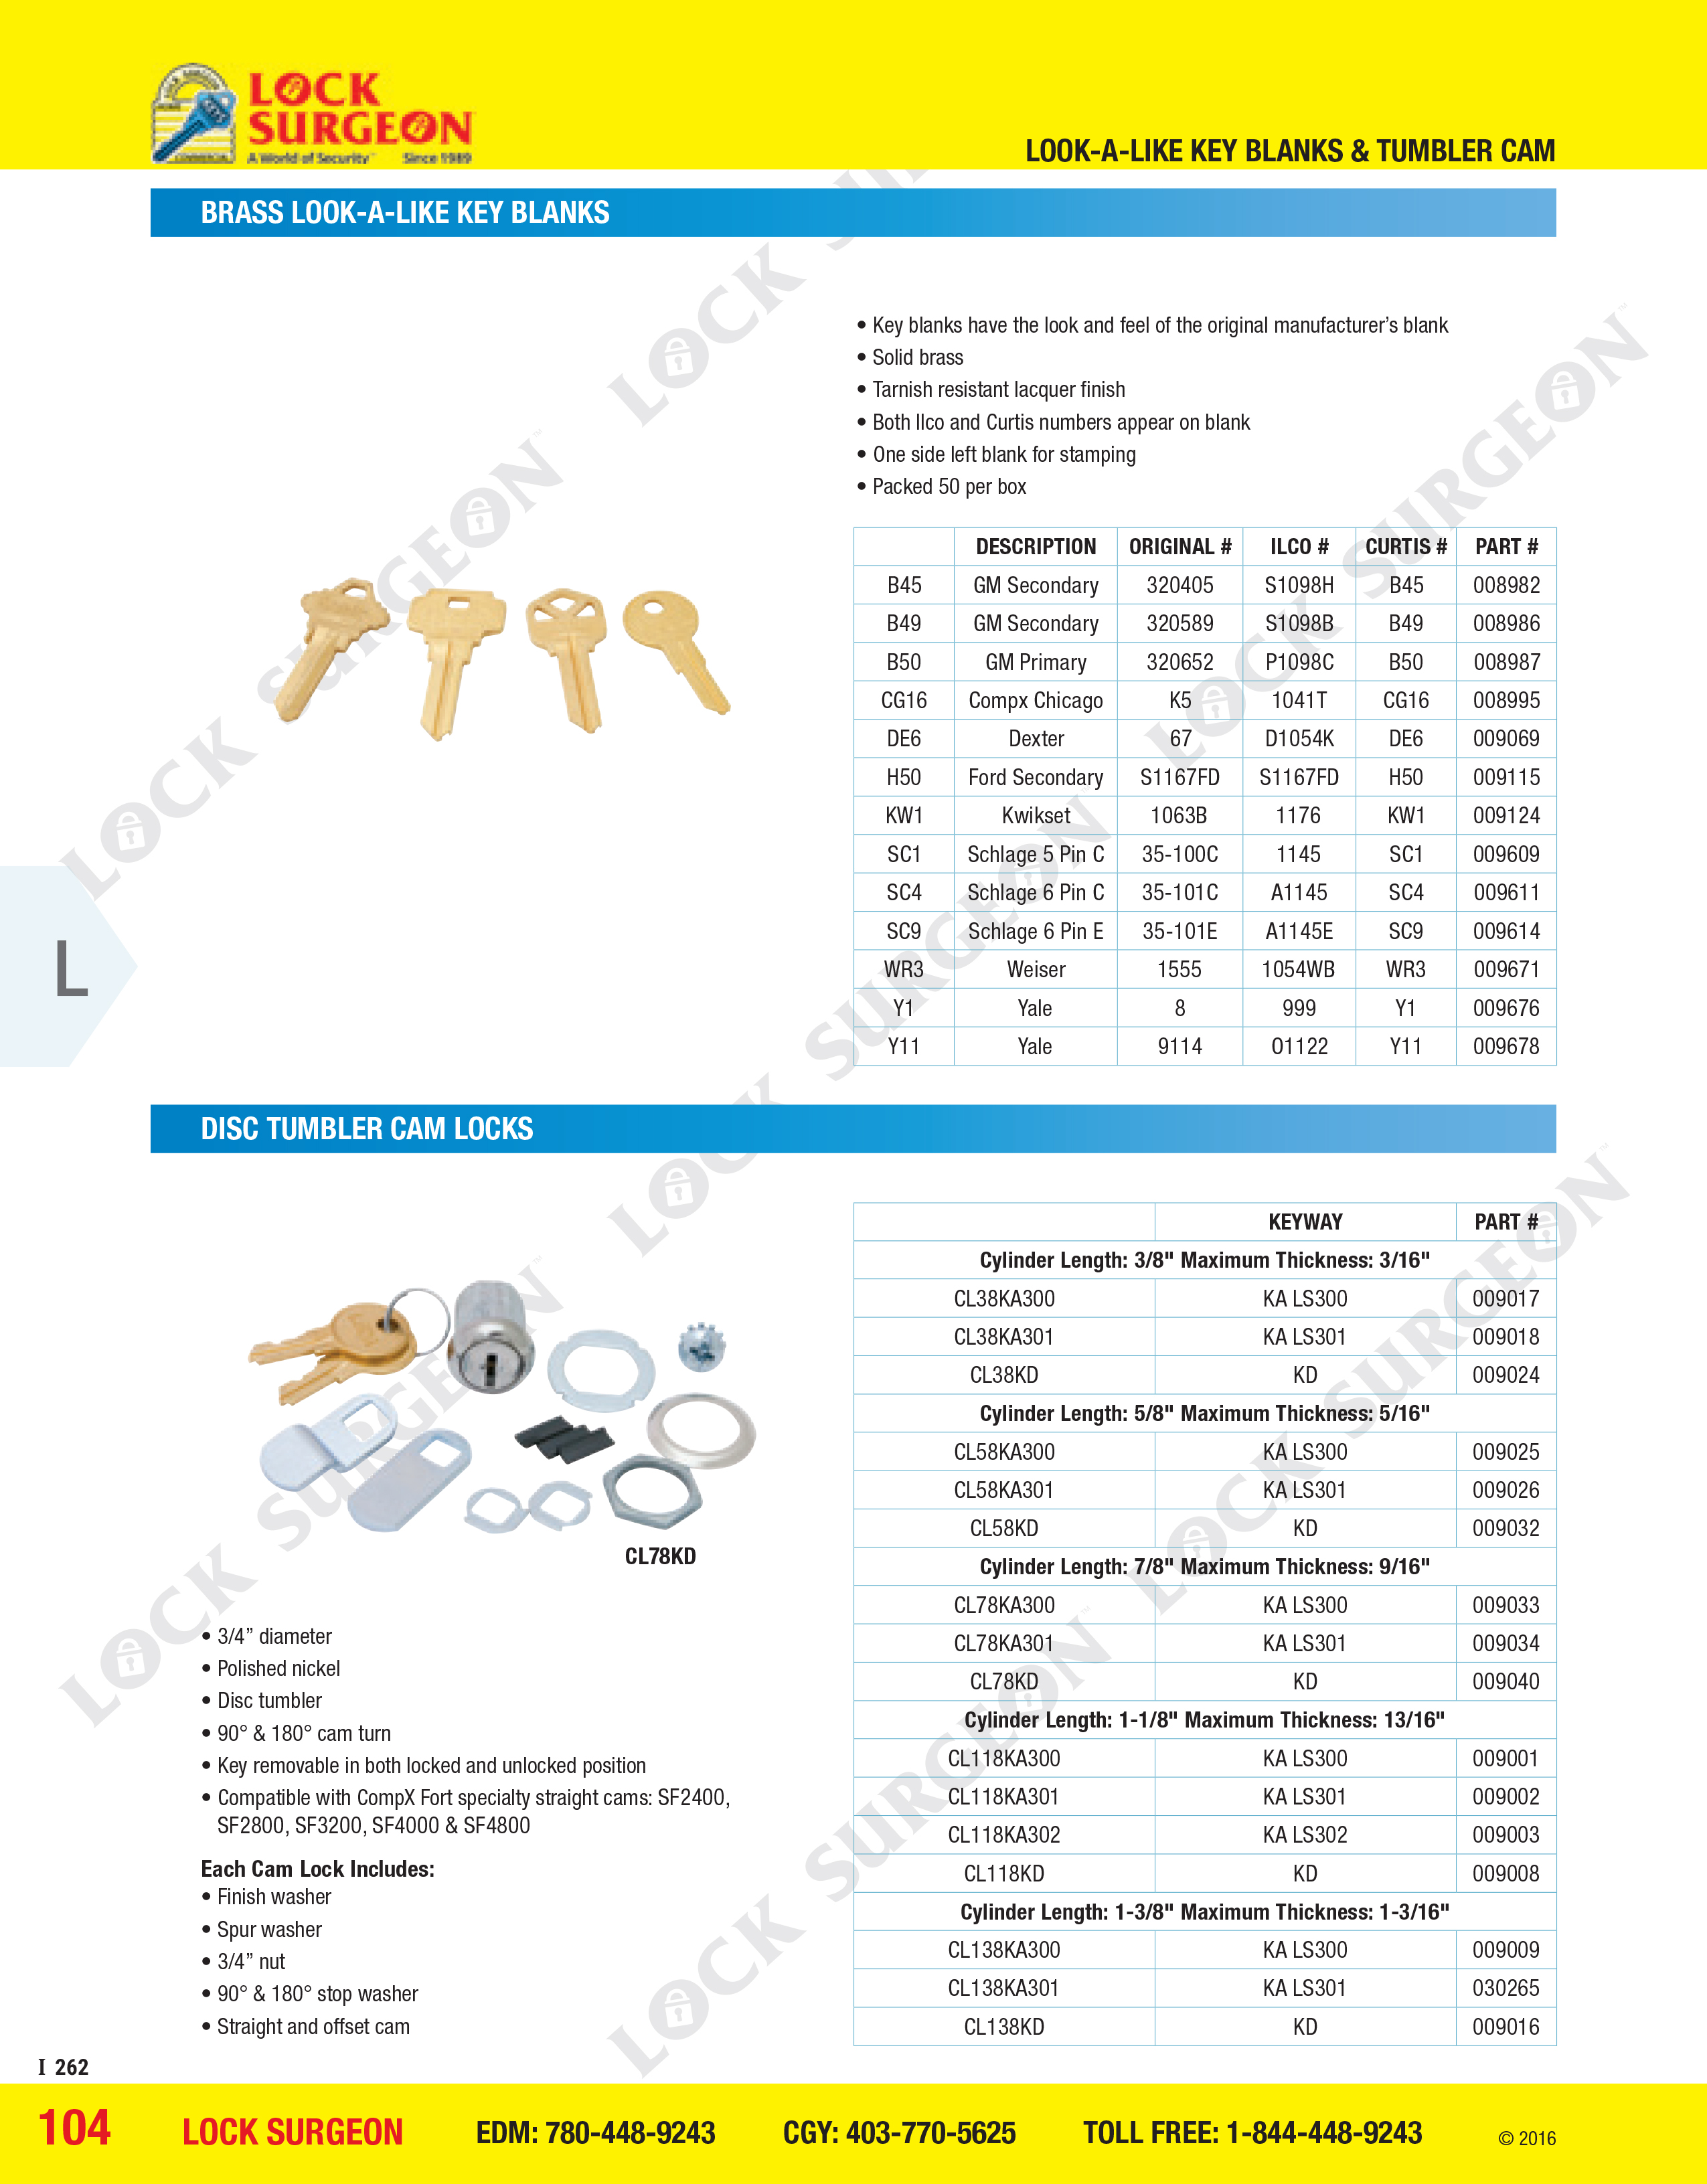 Acheson Brass look-a-like key blanks and tumbler cam